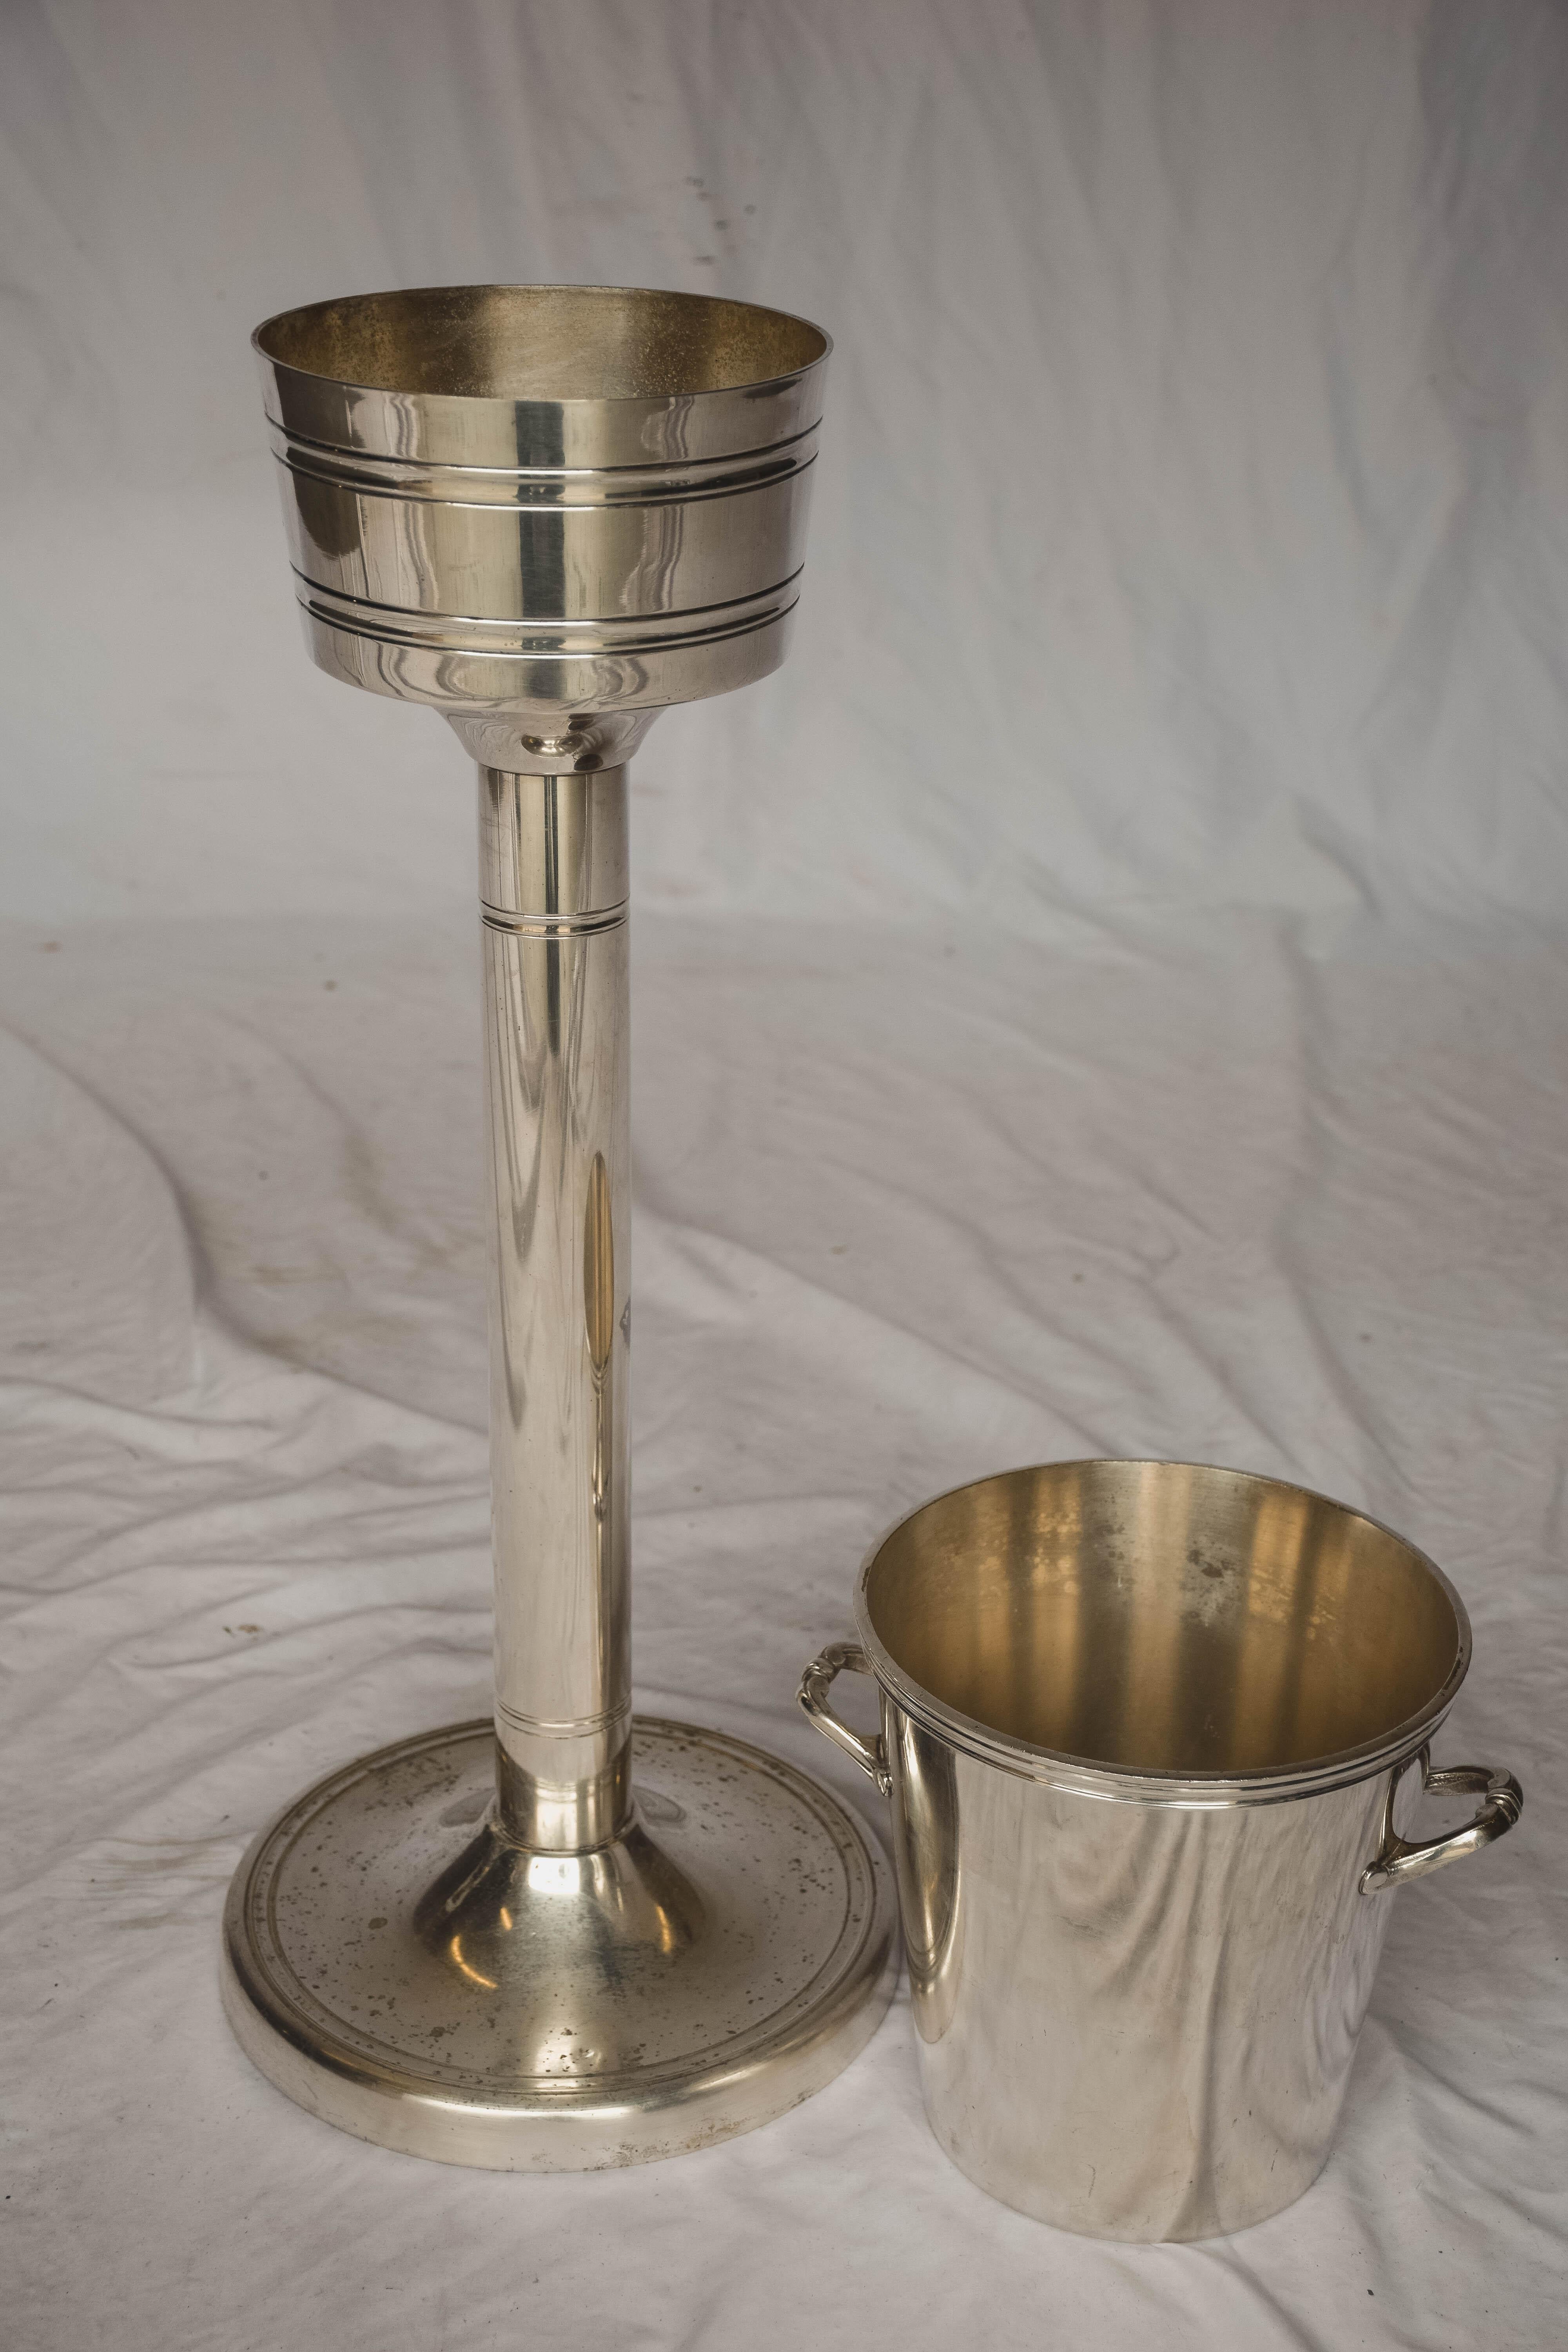 Hotel silver French Champagne bucket with stand from the Lyon region of France. Most likely used in a restaurant or hotel. The bucket itself is easily removed from the stand as seen in the photos.